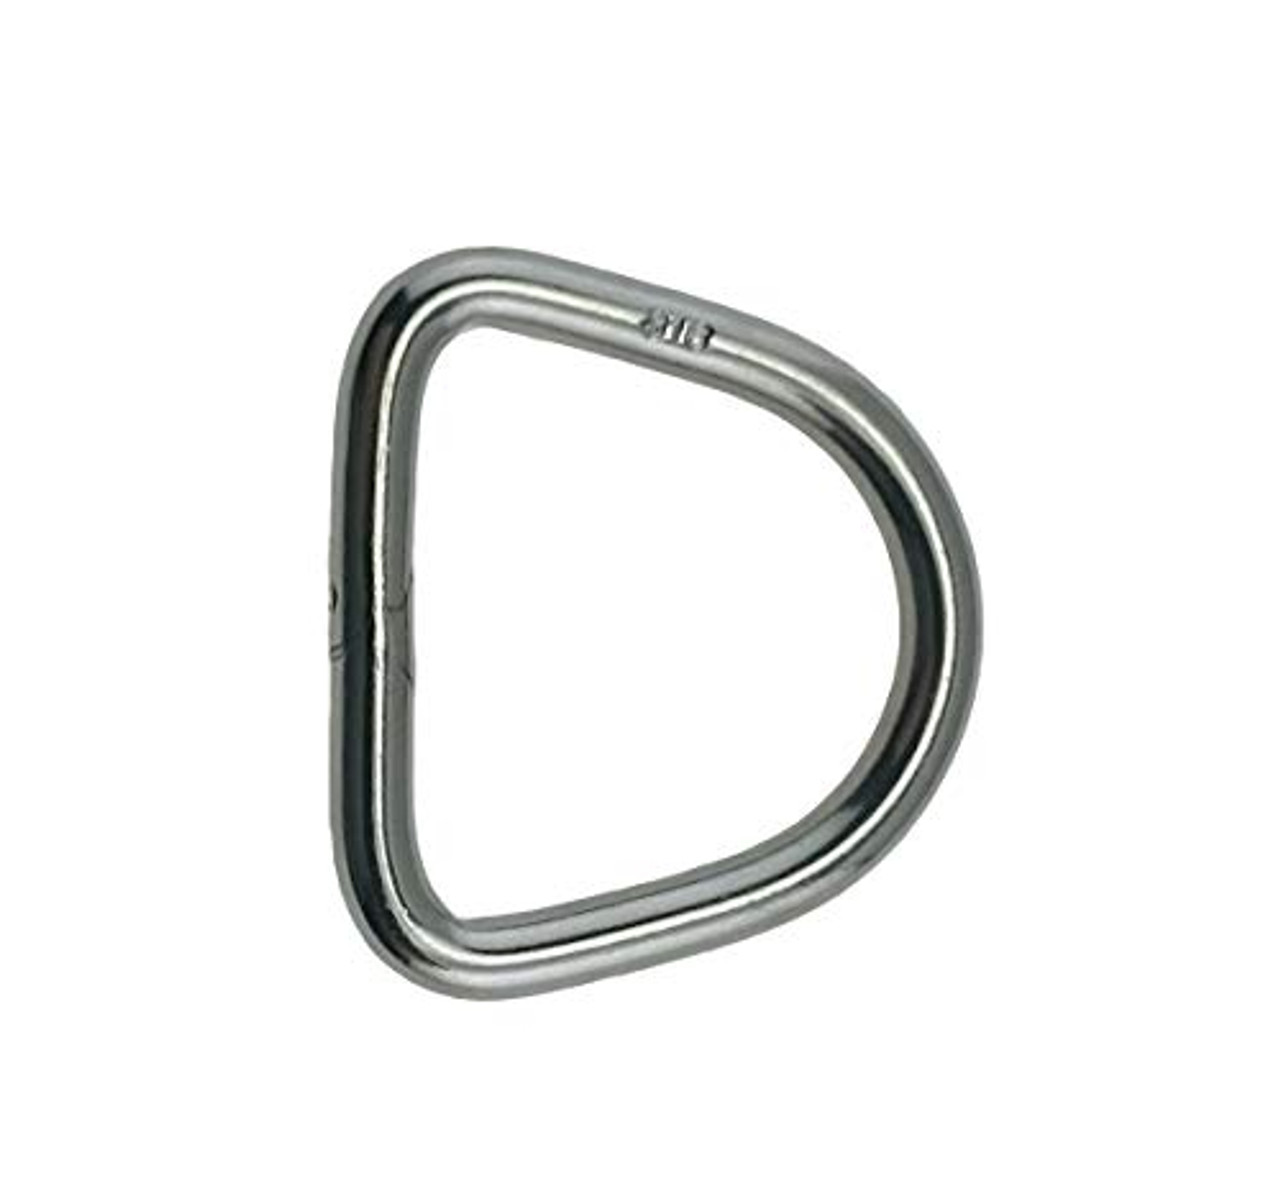 Stainless Steel 316 Round Ring Welded 3/16 x 1 5/8 (5mm x 40mm) Marine  Grade - US Stainless